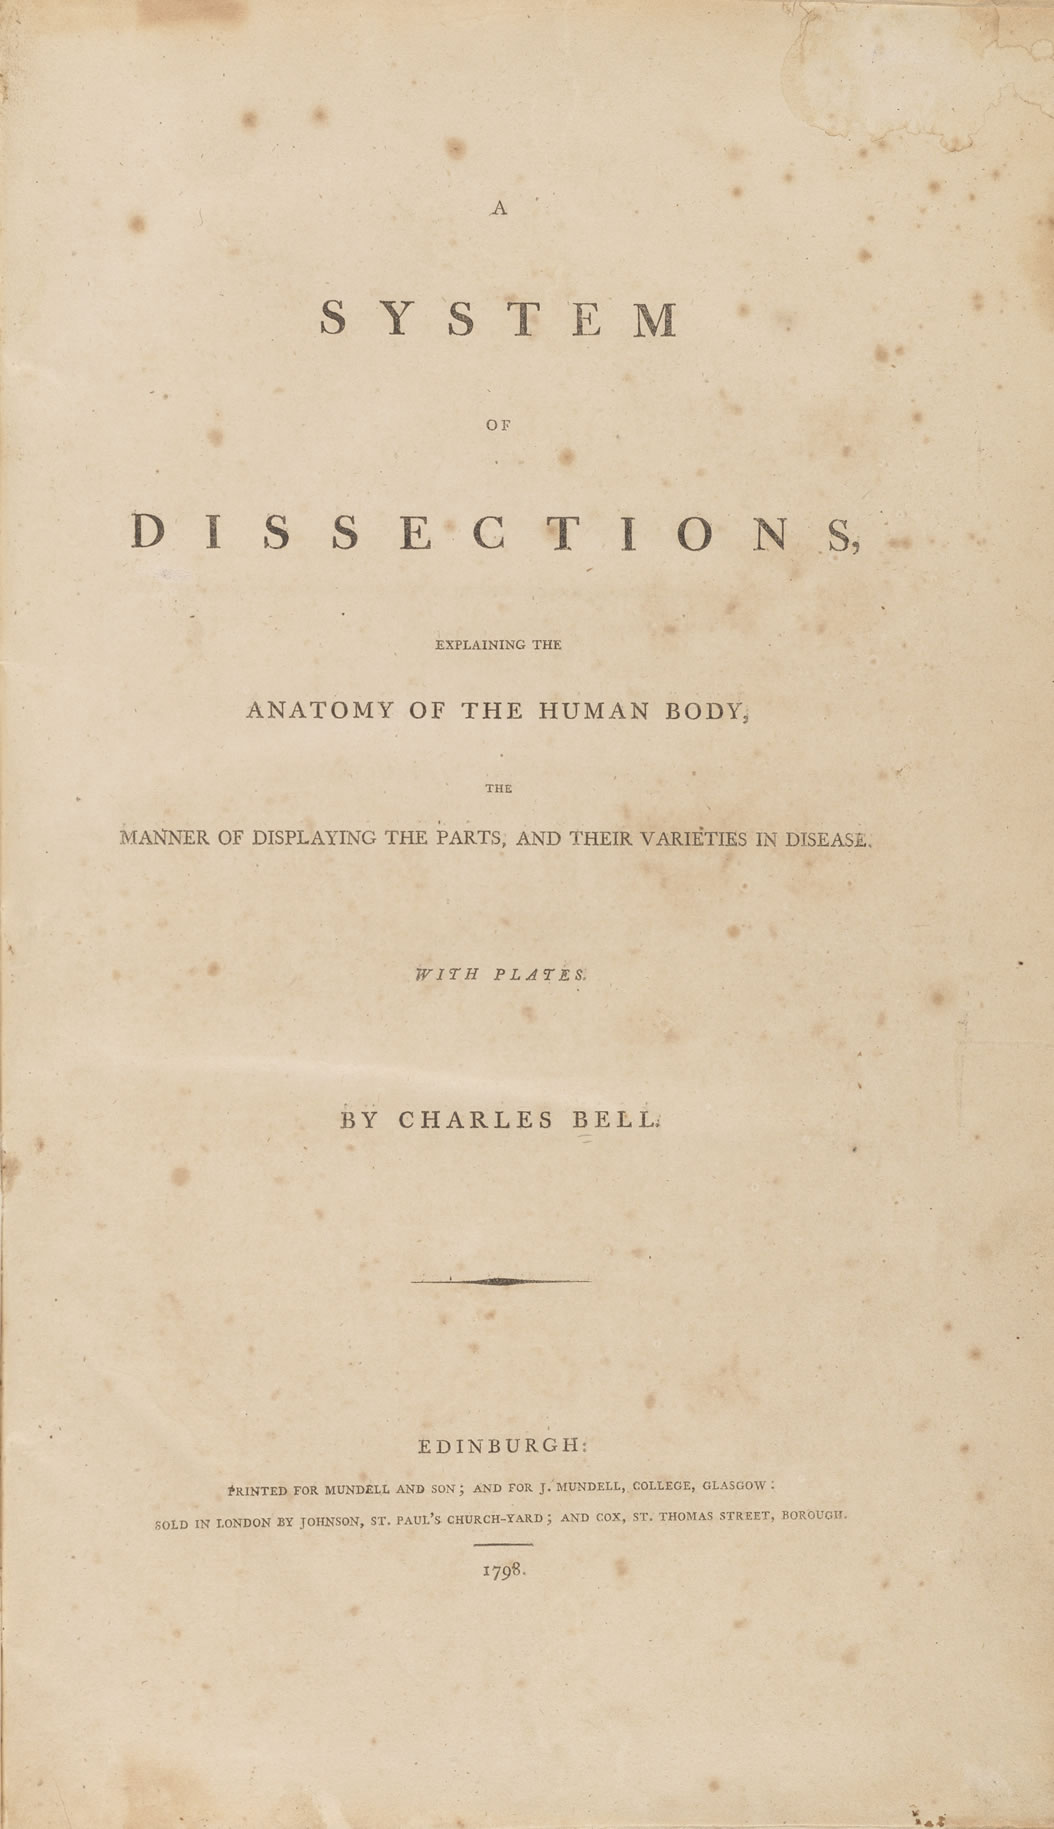 A System of Dissections, explaining the anatomy of the human body, and the manner of displaying the parts, and their varieties in disease.</p